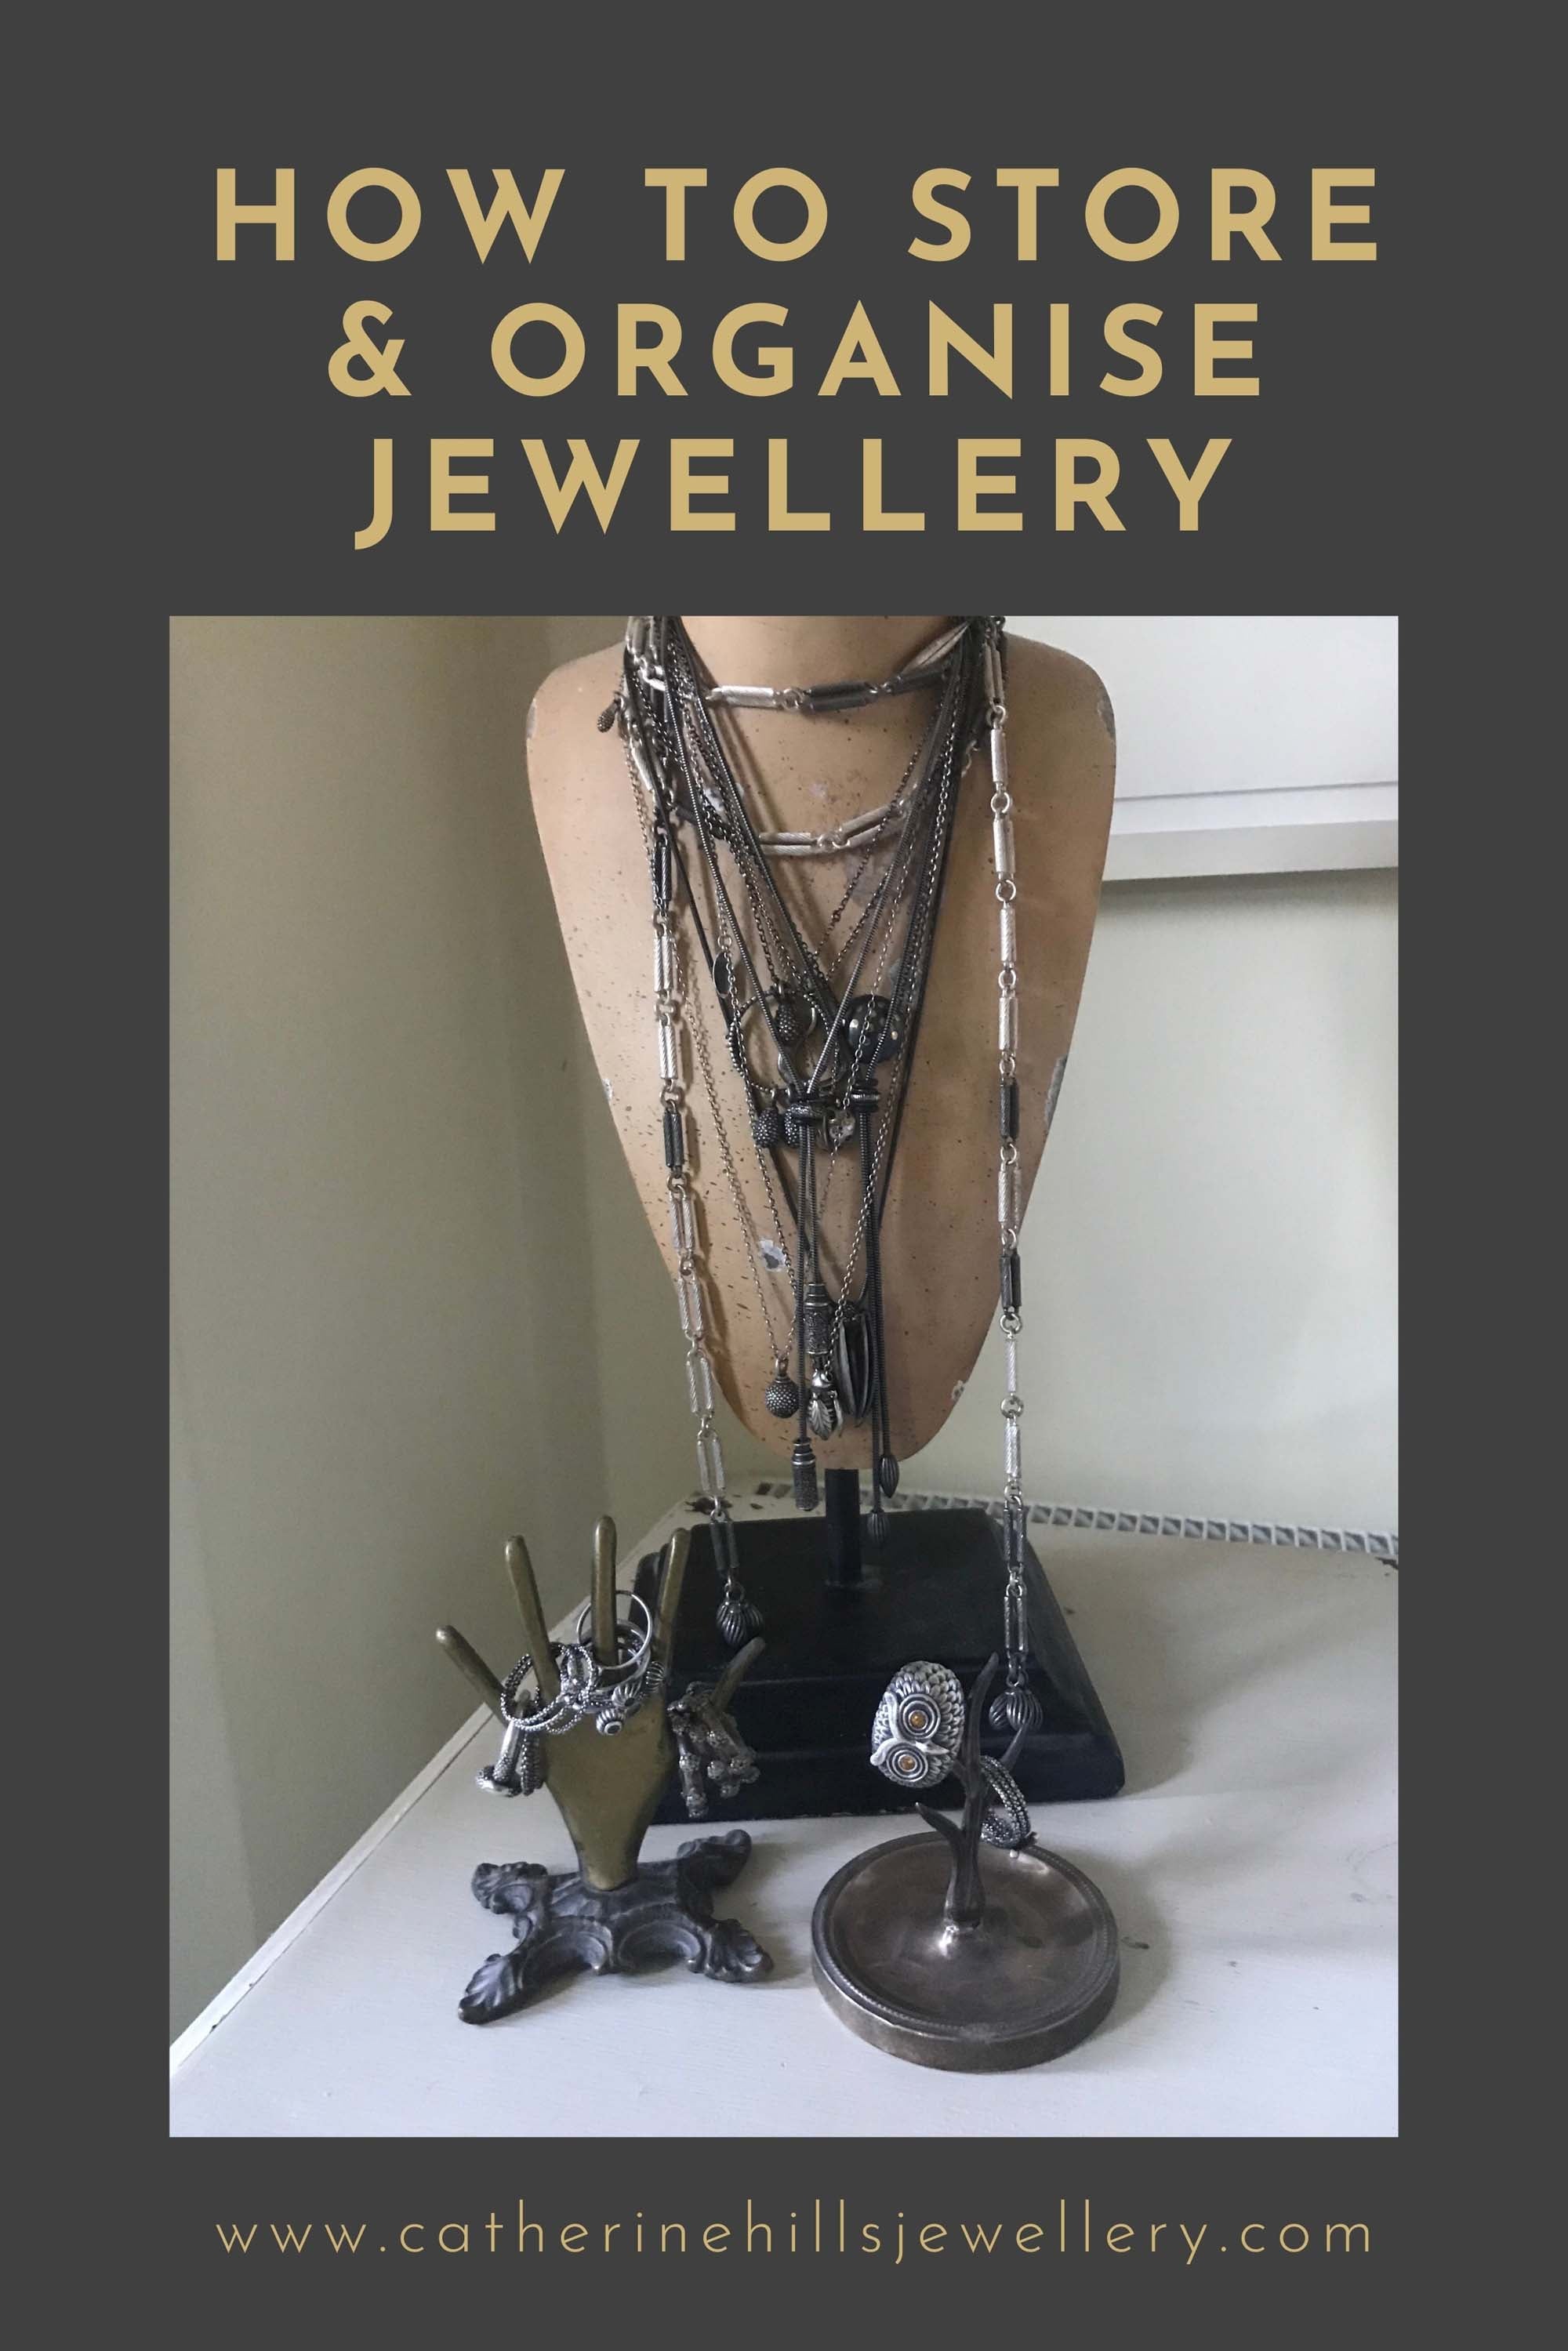 How to store and organise jewellery by Catherine Hills